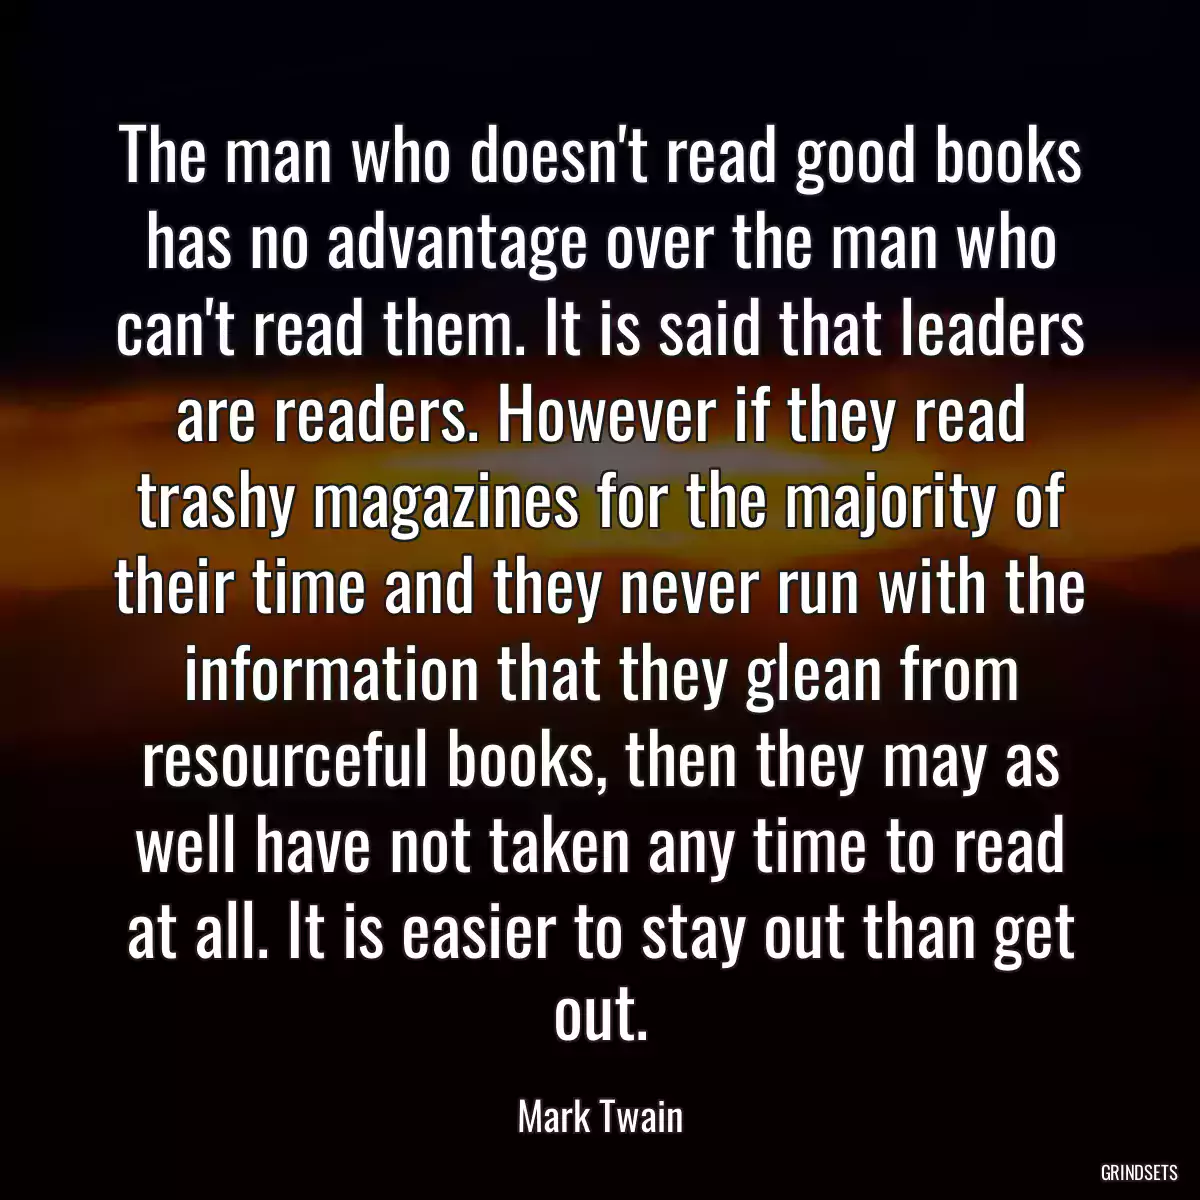 The man who doesn\'t read good books has no advantage over the man who can\'t read them. It is said that leaders are readers. However if they read trashy magazines for the majority of their time and they never run with the information that they glean from resourceful books, then they may as well have not taken any time to read at all. It is easier to stay out than get out.